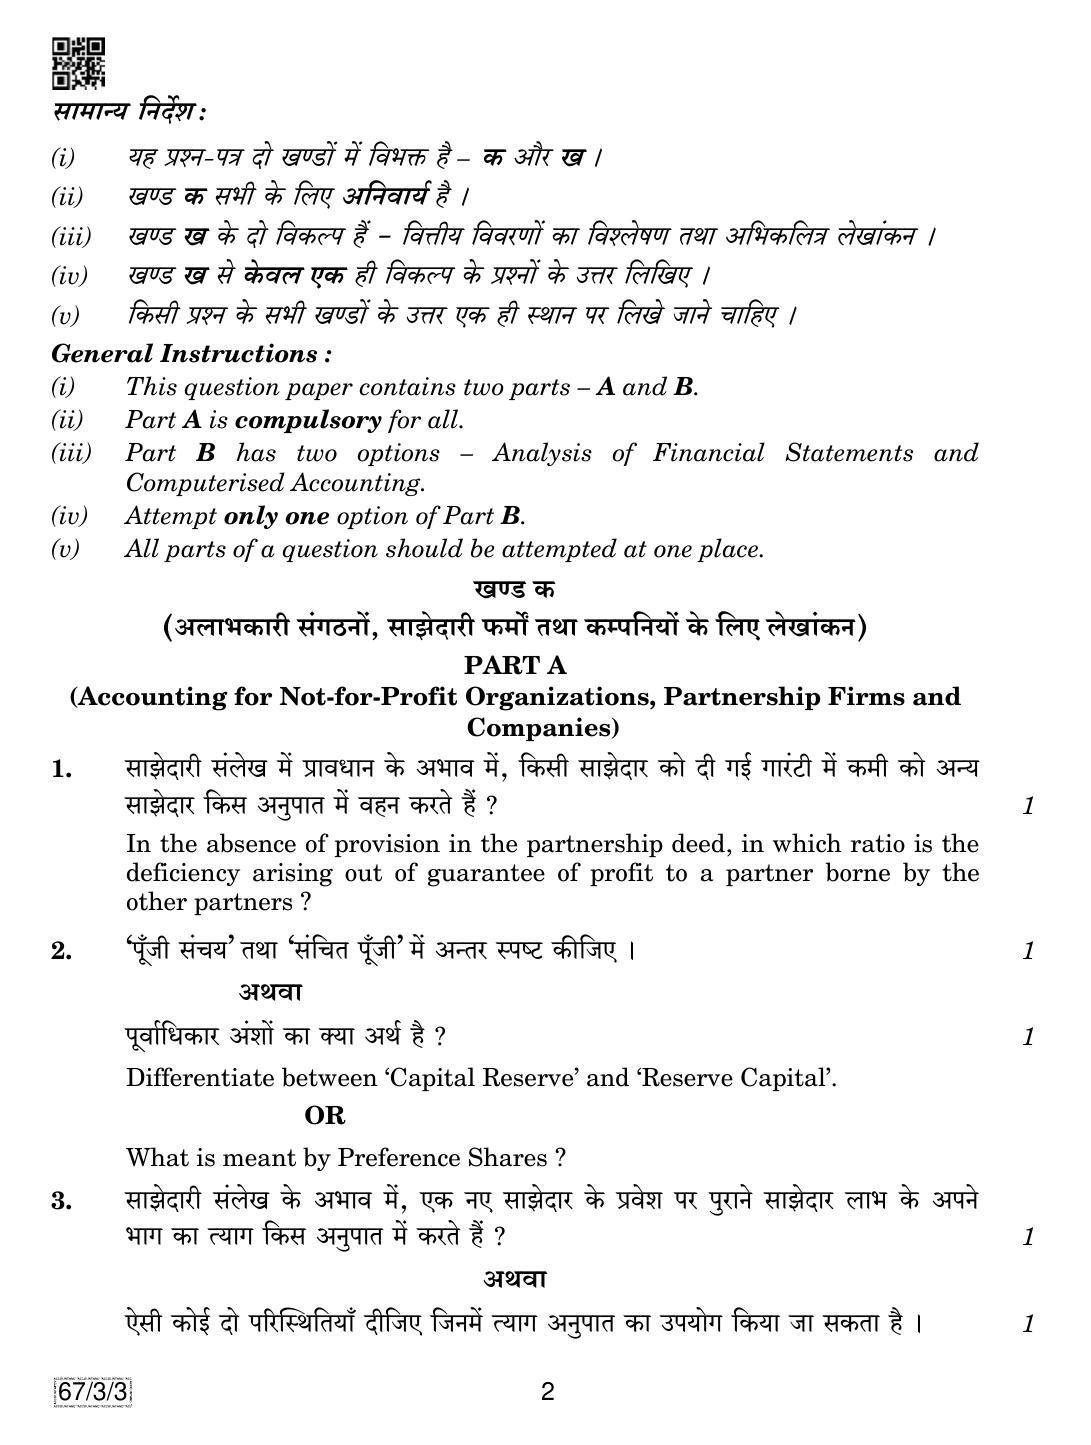 CBSE Class 12 67-3-3 Accountancy 2019 Question Paper - Page 2